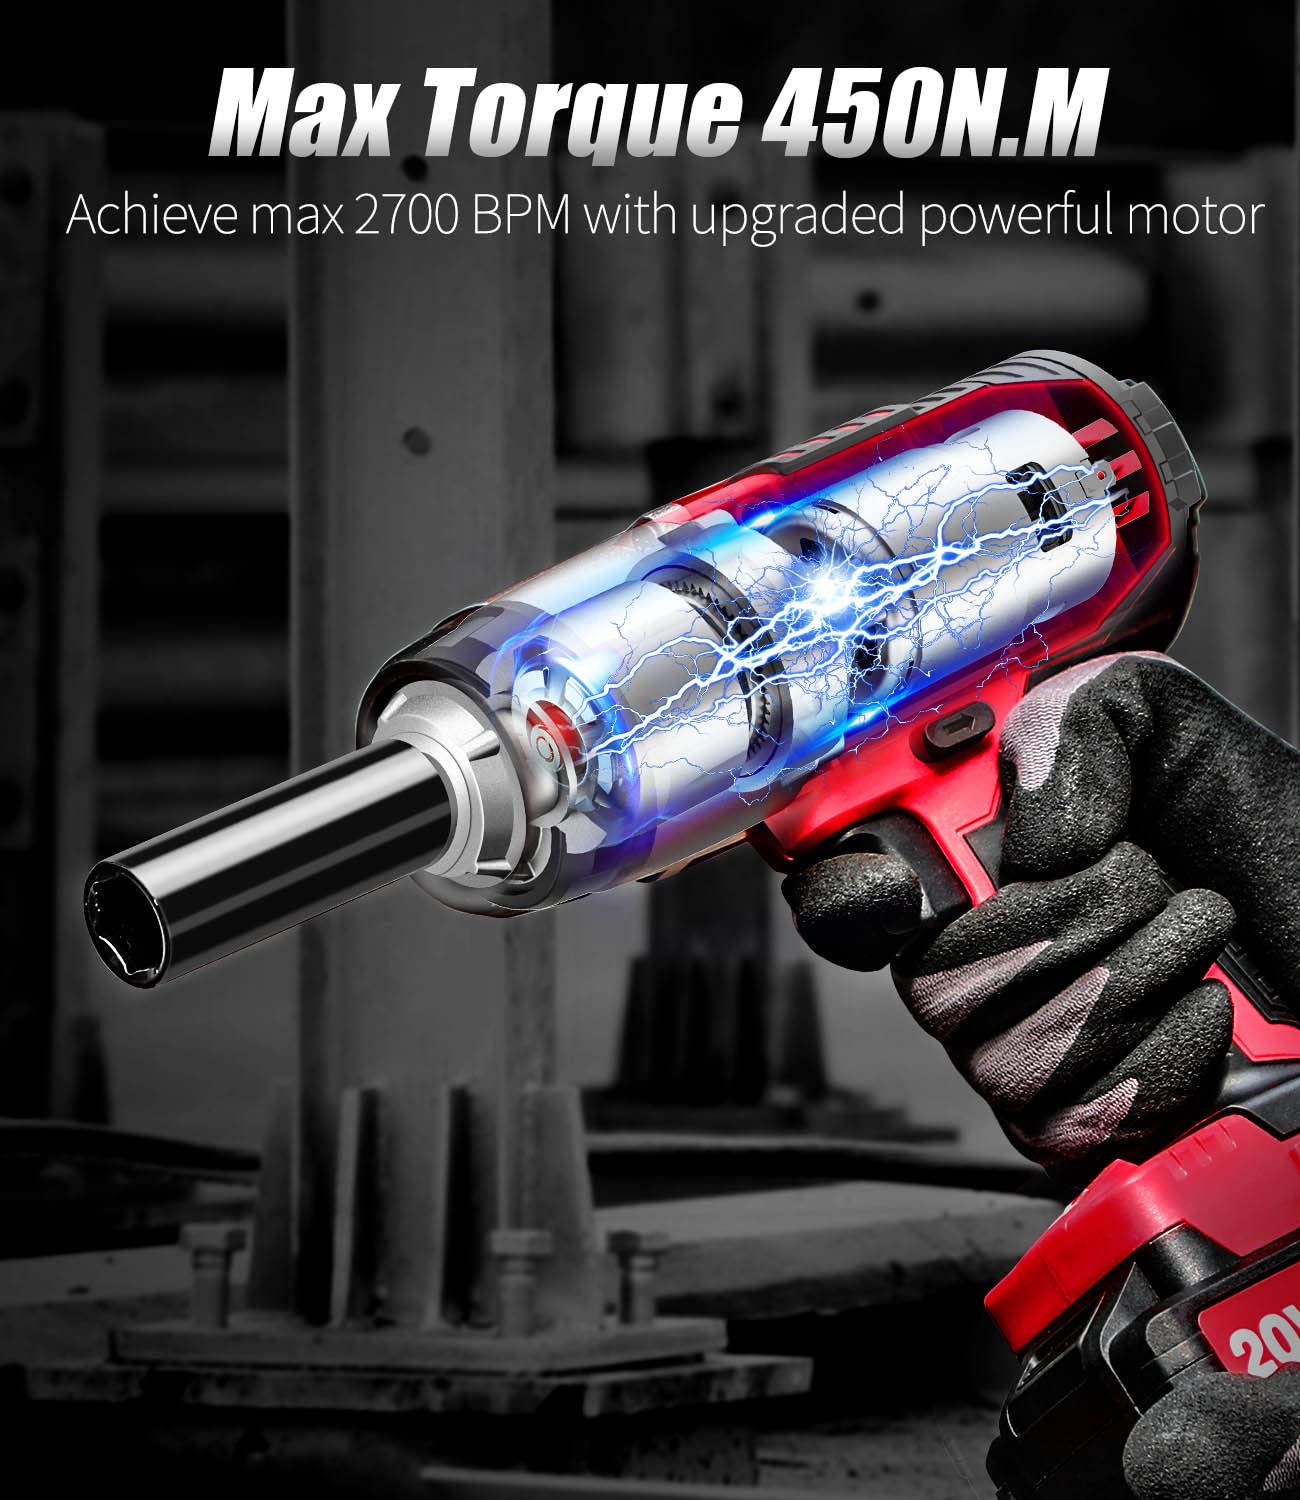 AVID POWER Cordless Impact Wrench, 1/2 Impact Gun w/Max Torque 330 ft lbs (450N.m), Power Impact Wrenches w/ 3.0A Li-ion Battery, 4 Pcs Impact Sockets and 1 Hour Fast Charger, 20V Impact Driver Kit